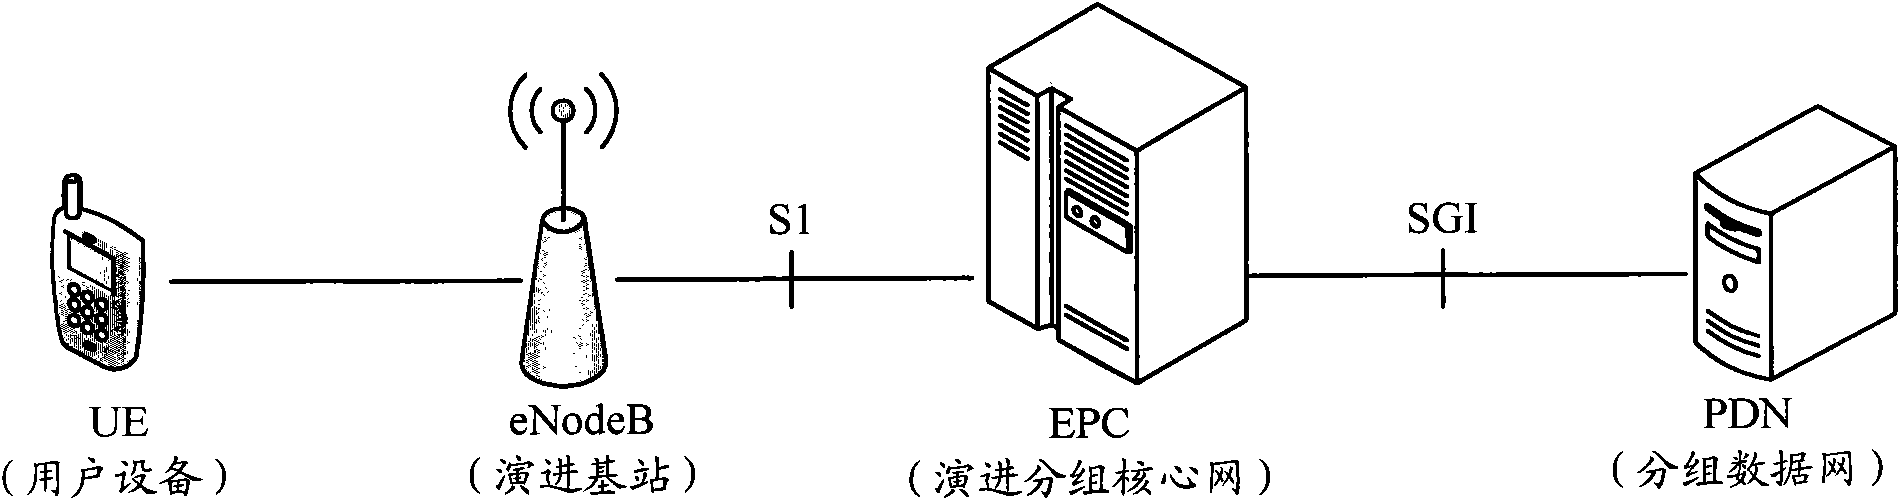 Equipment and method for testing evolved packet core network equipment